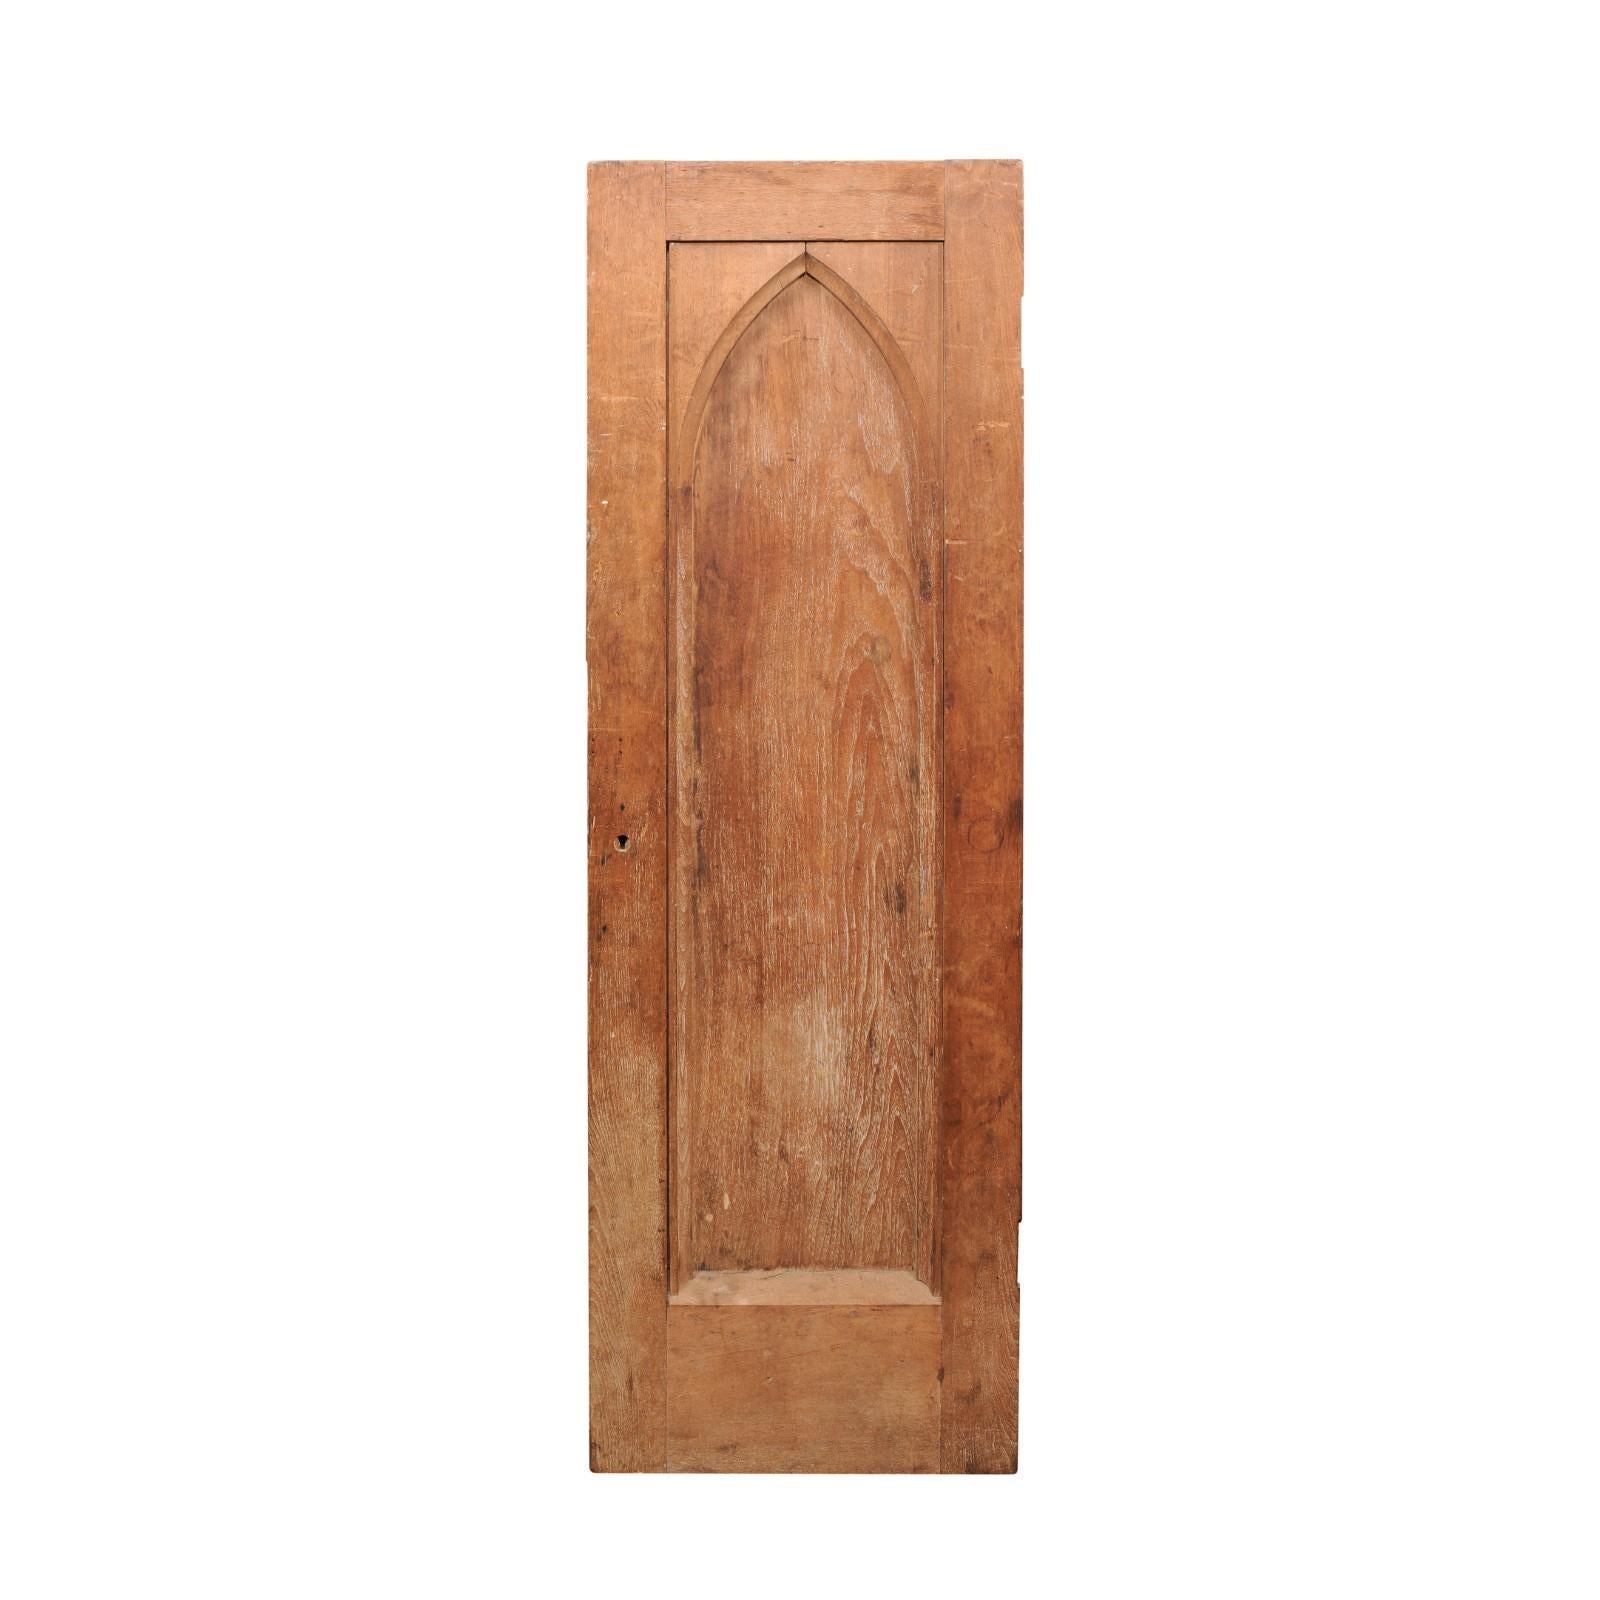  Late 19th Century Wooden Door with Gothic Style Arch Detail In Good Condition For Sale In Atlanta, GA